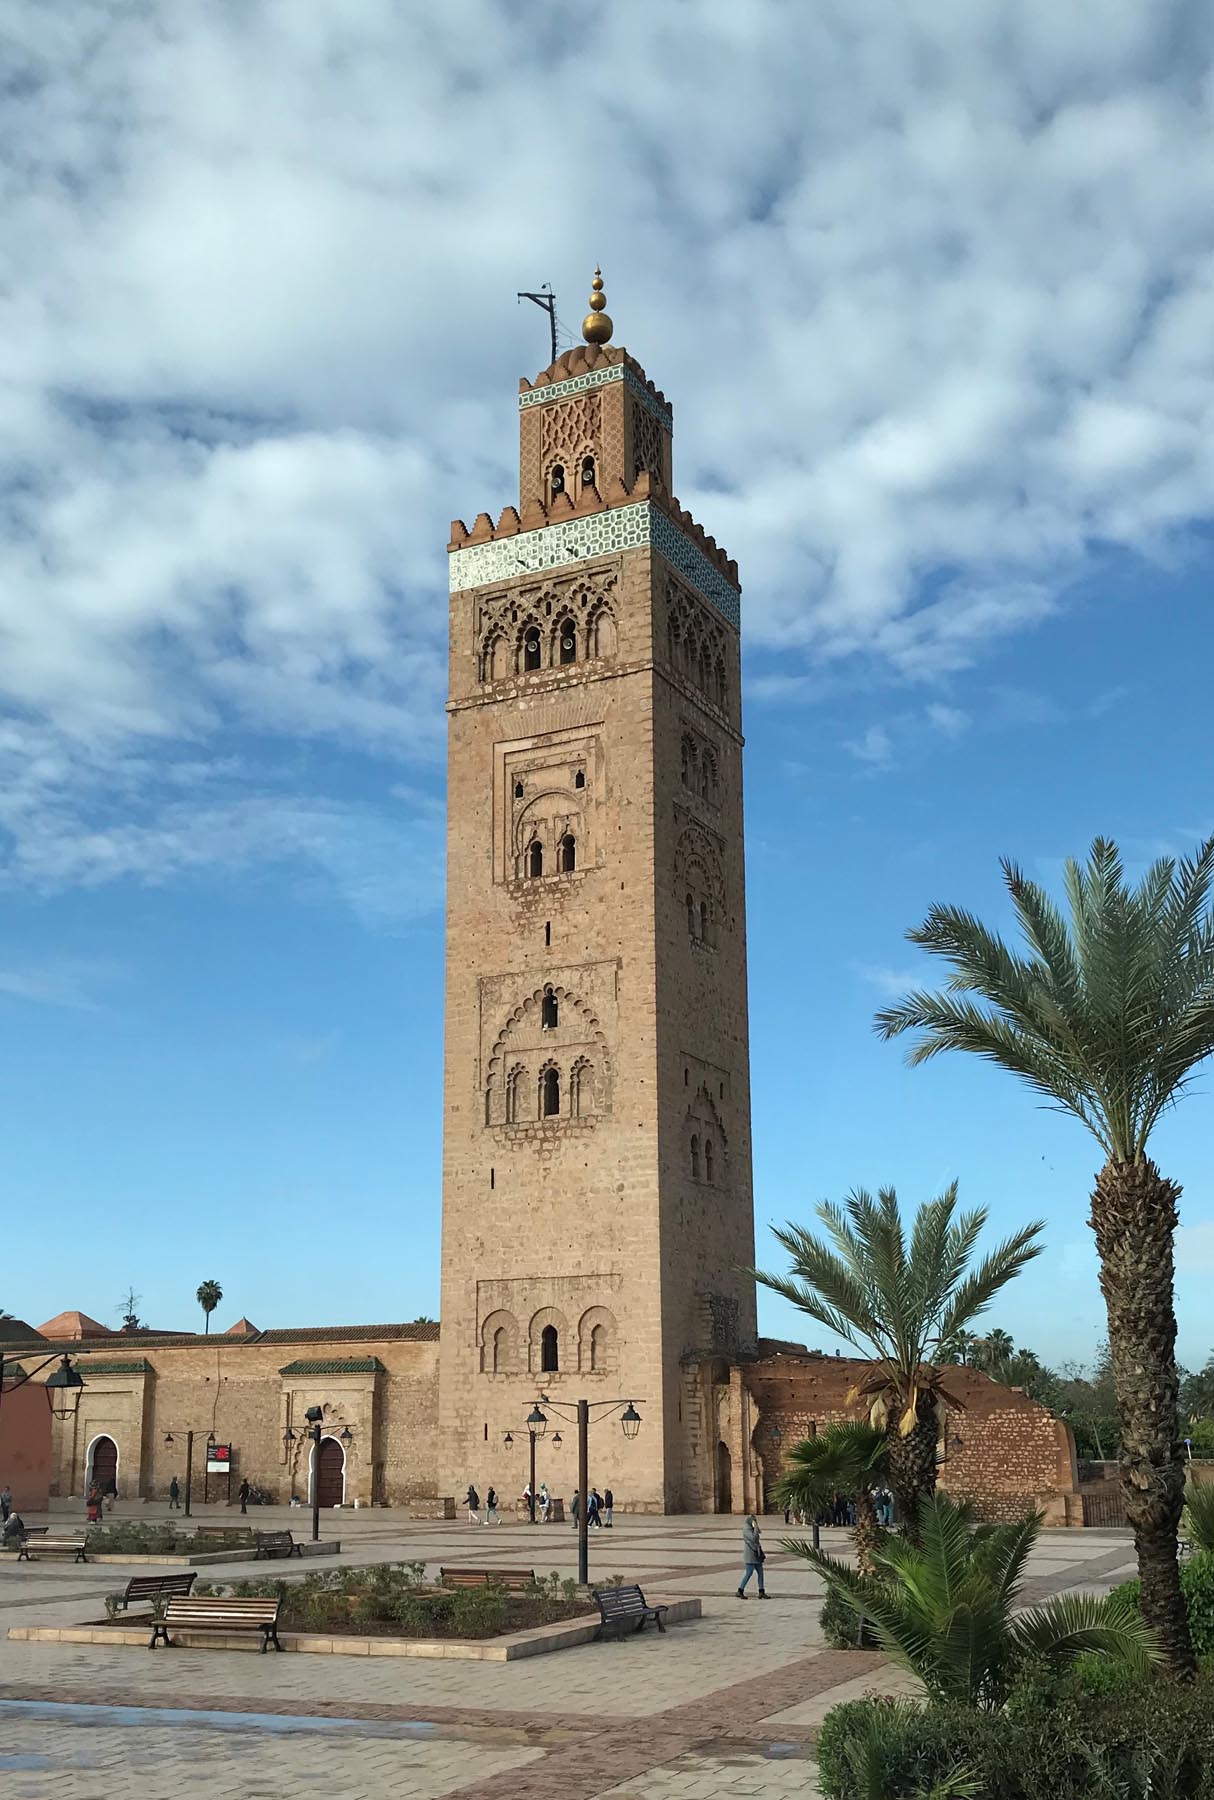 The Minaret Of The 12th Century Koutoubia Mosque In